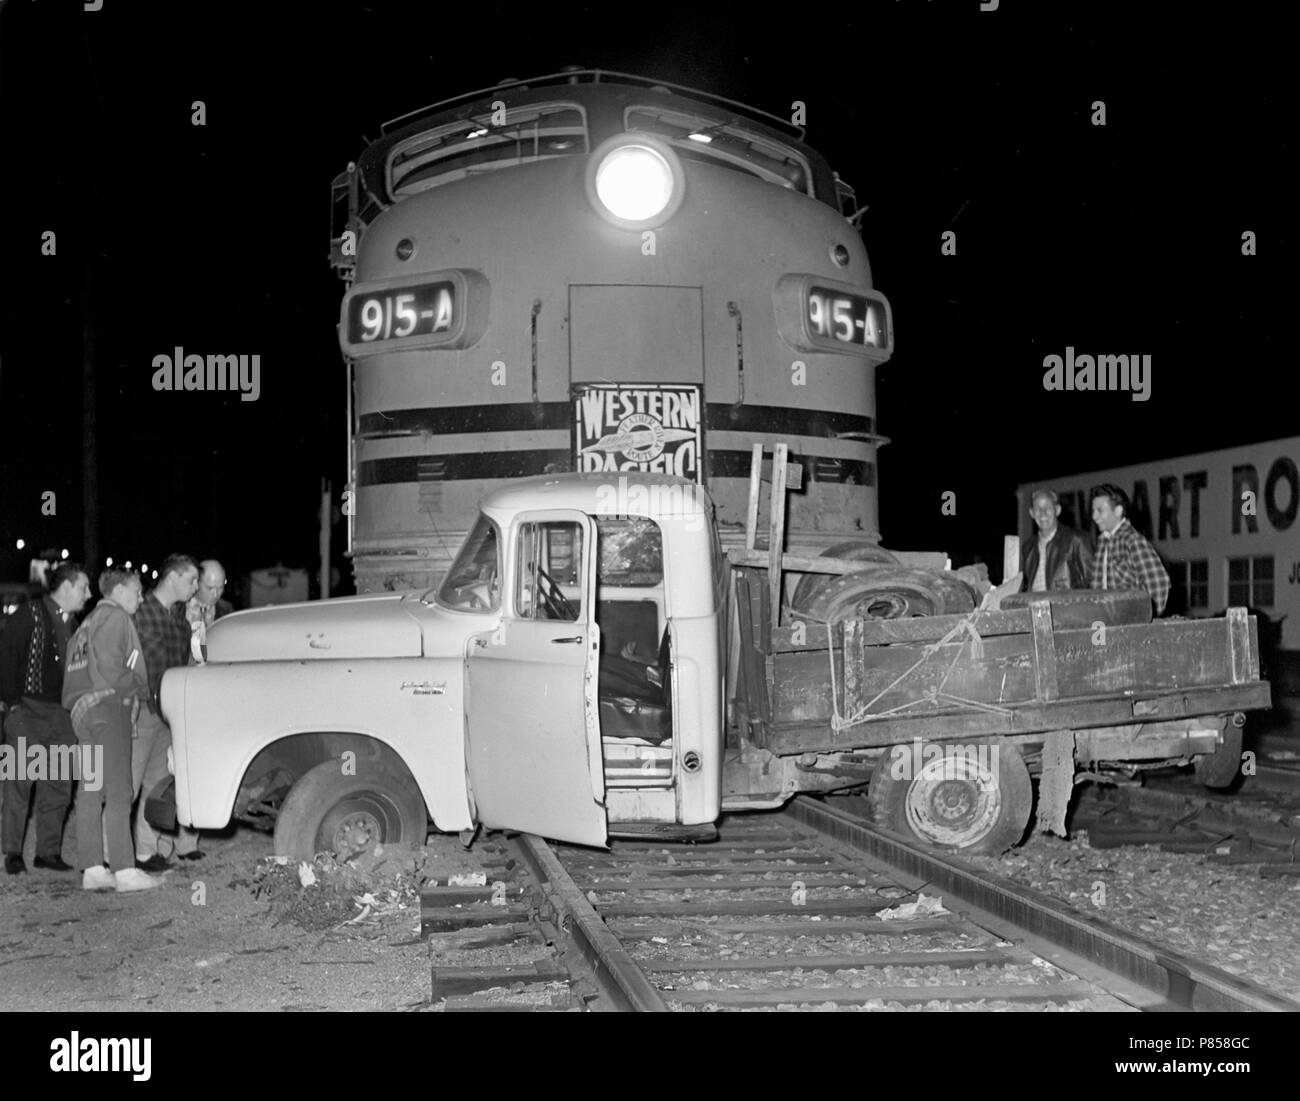 A Western Pacific locomotive wins a battle with a pickup truck at a California intersection, ca. 1962. Stock Photo